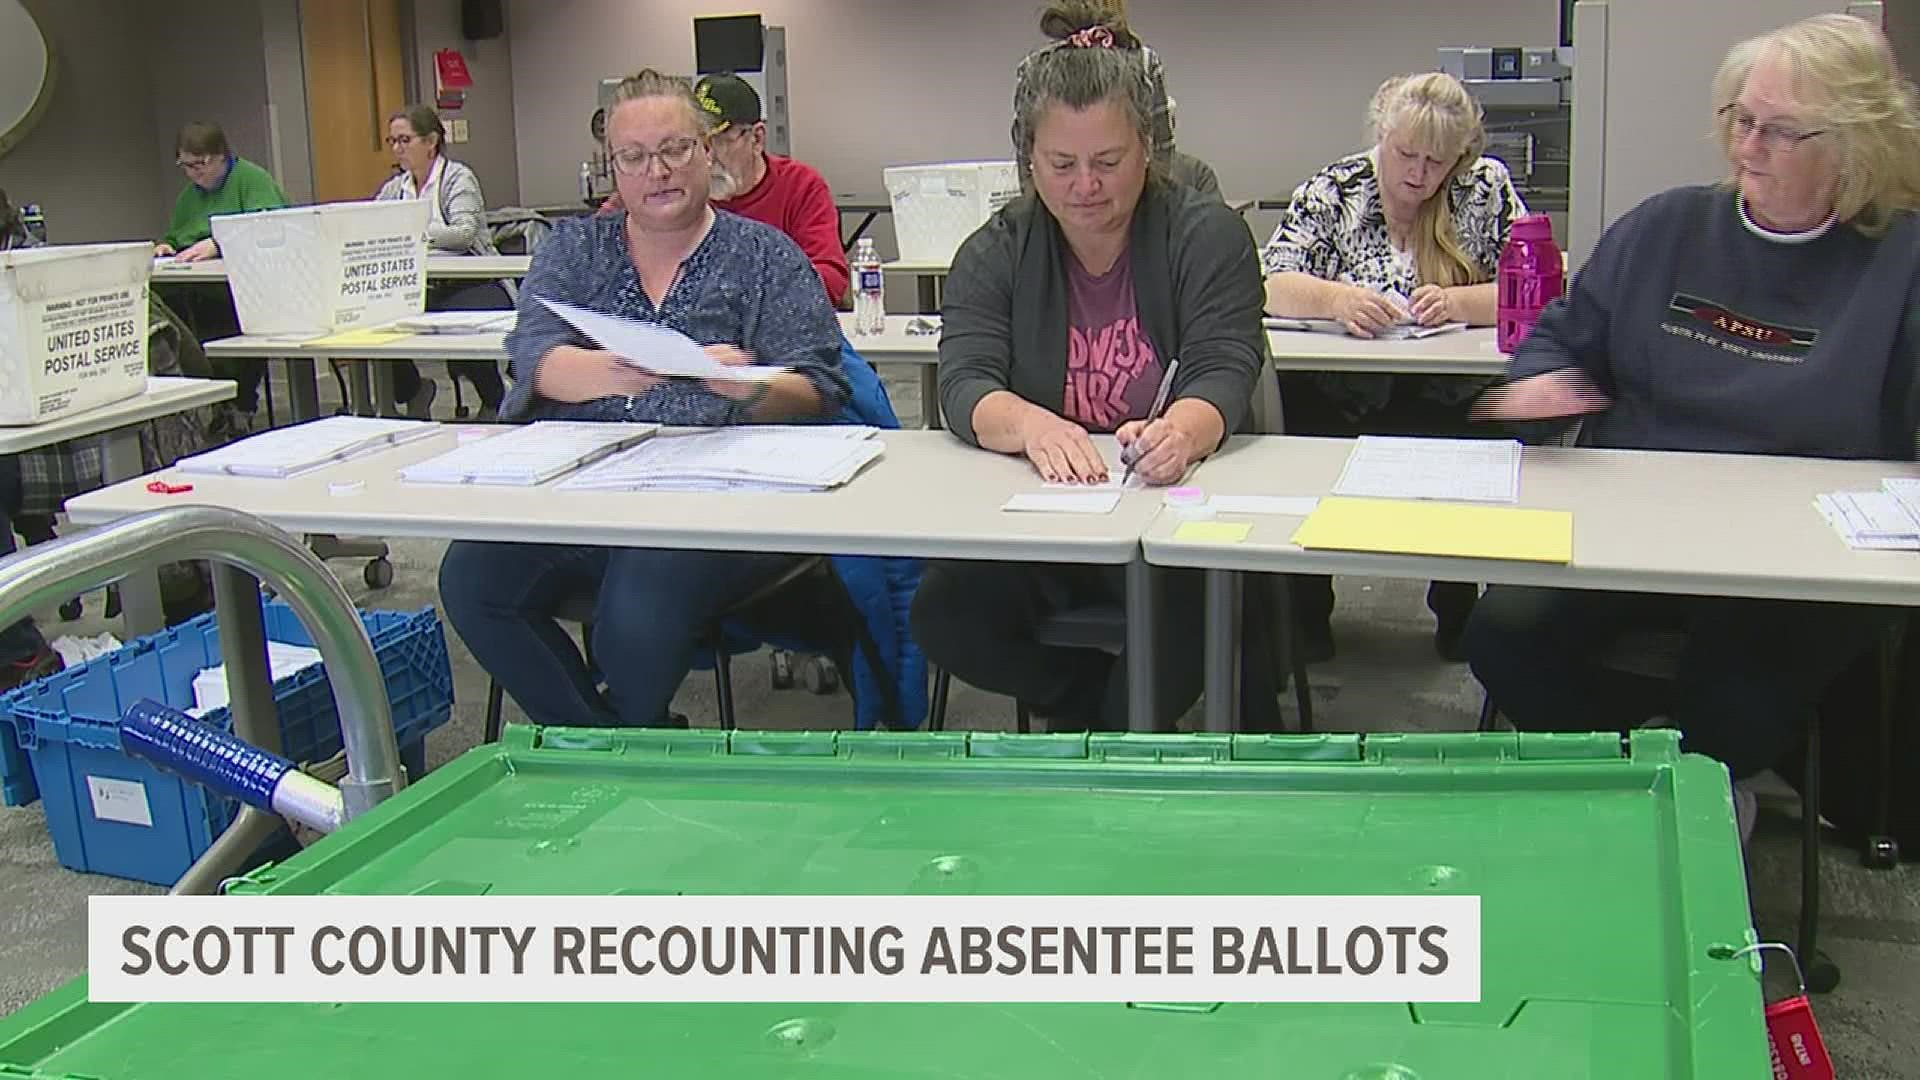 After experiencing issues earlier this week, Scott County election officials are recounting ballots by hand.